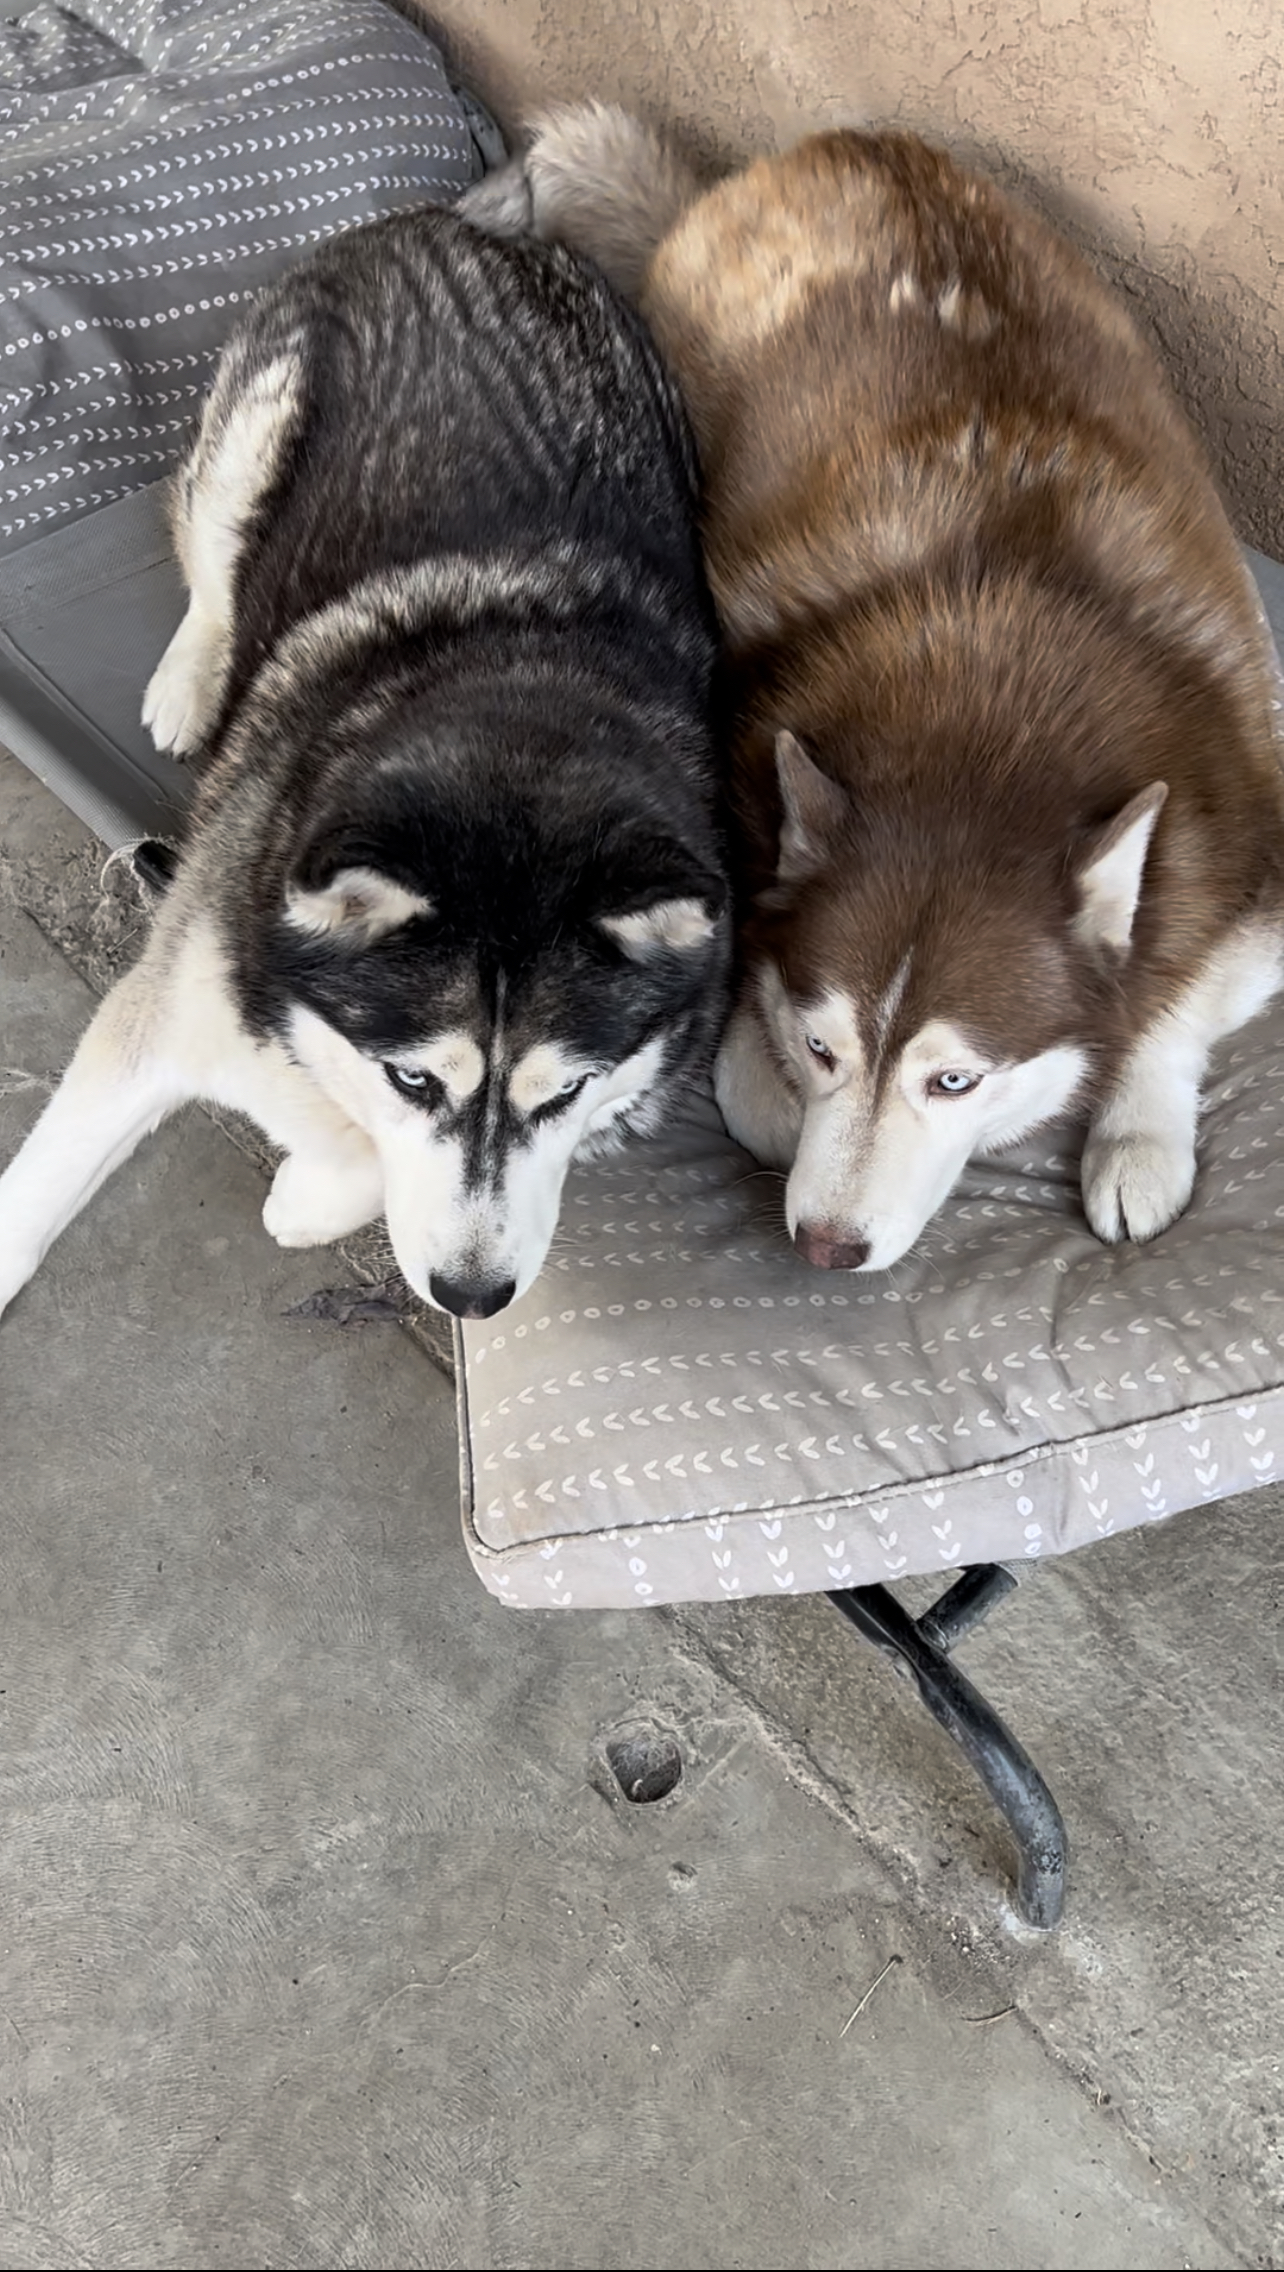 A black and white husky and a red and white husky squeezing together on one pillow while they play.